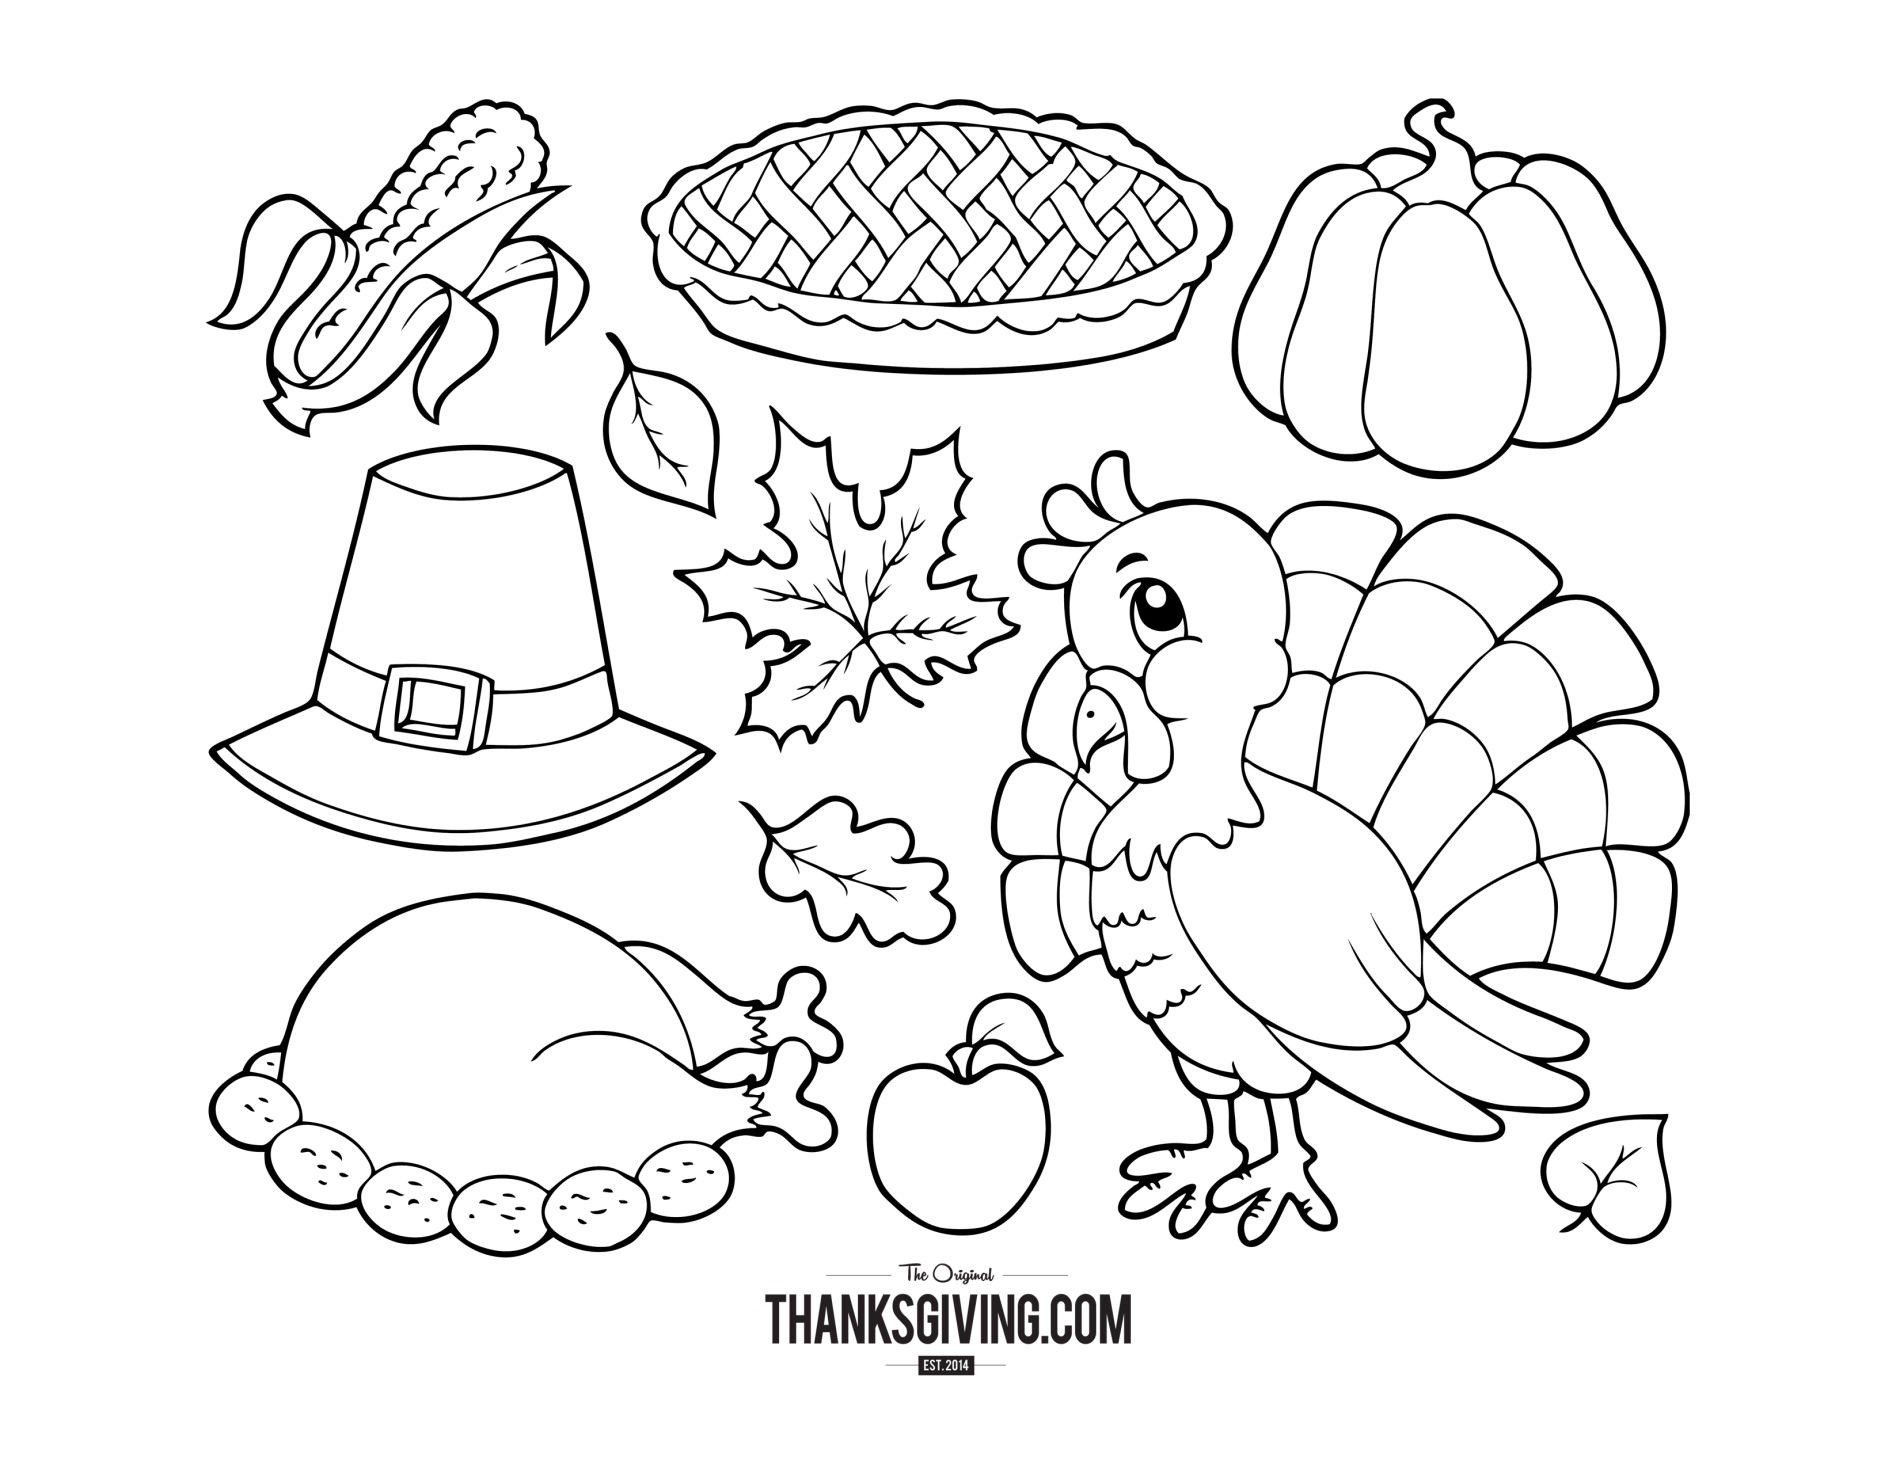 Turkey Dinner Coloring Page Wallpaper